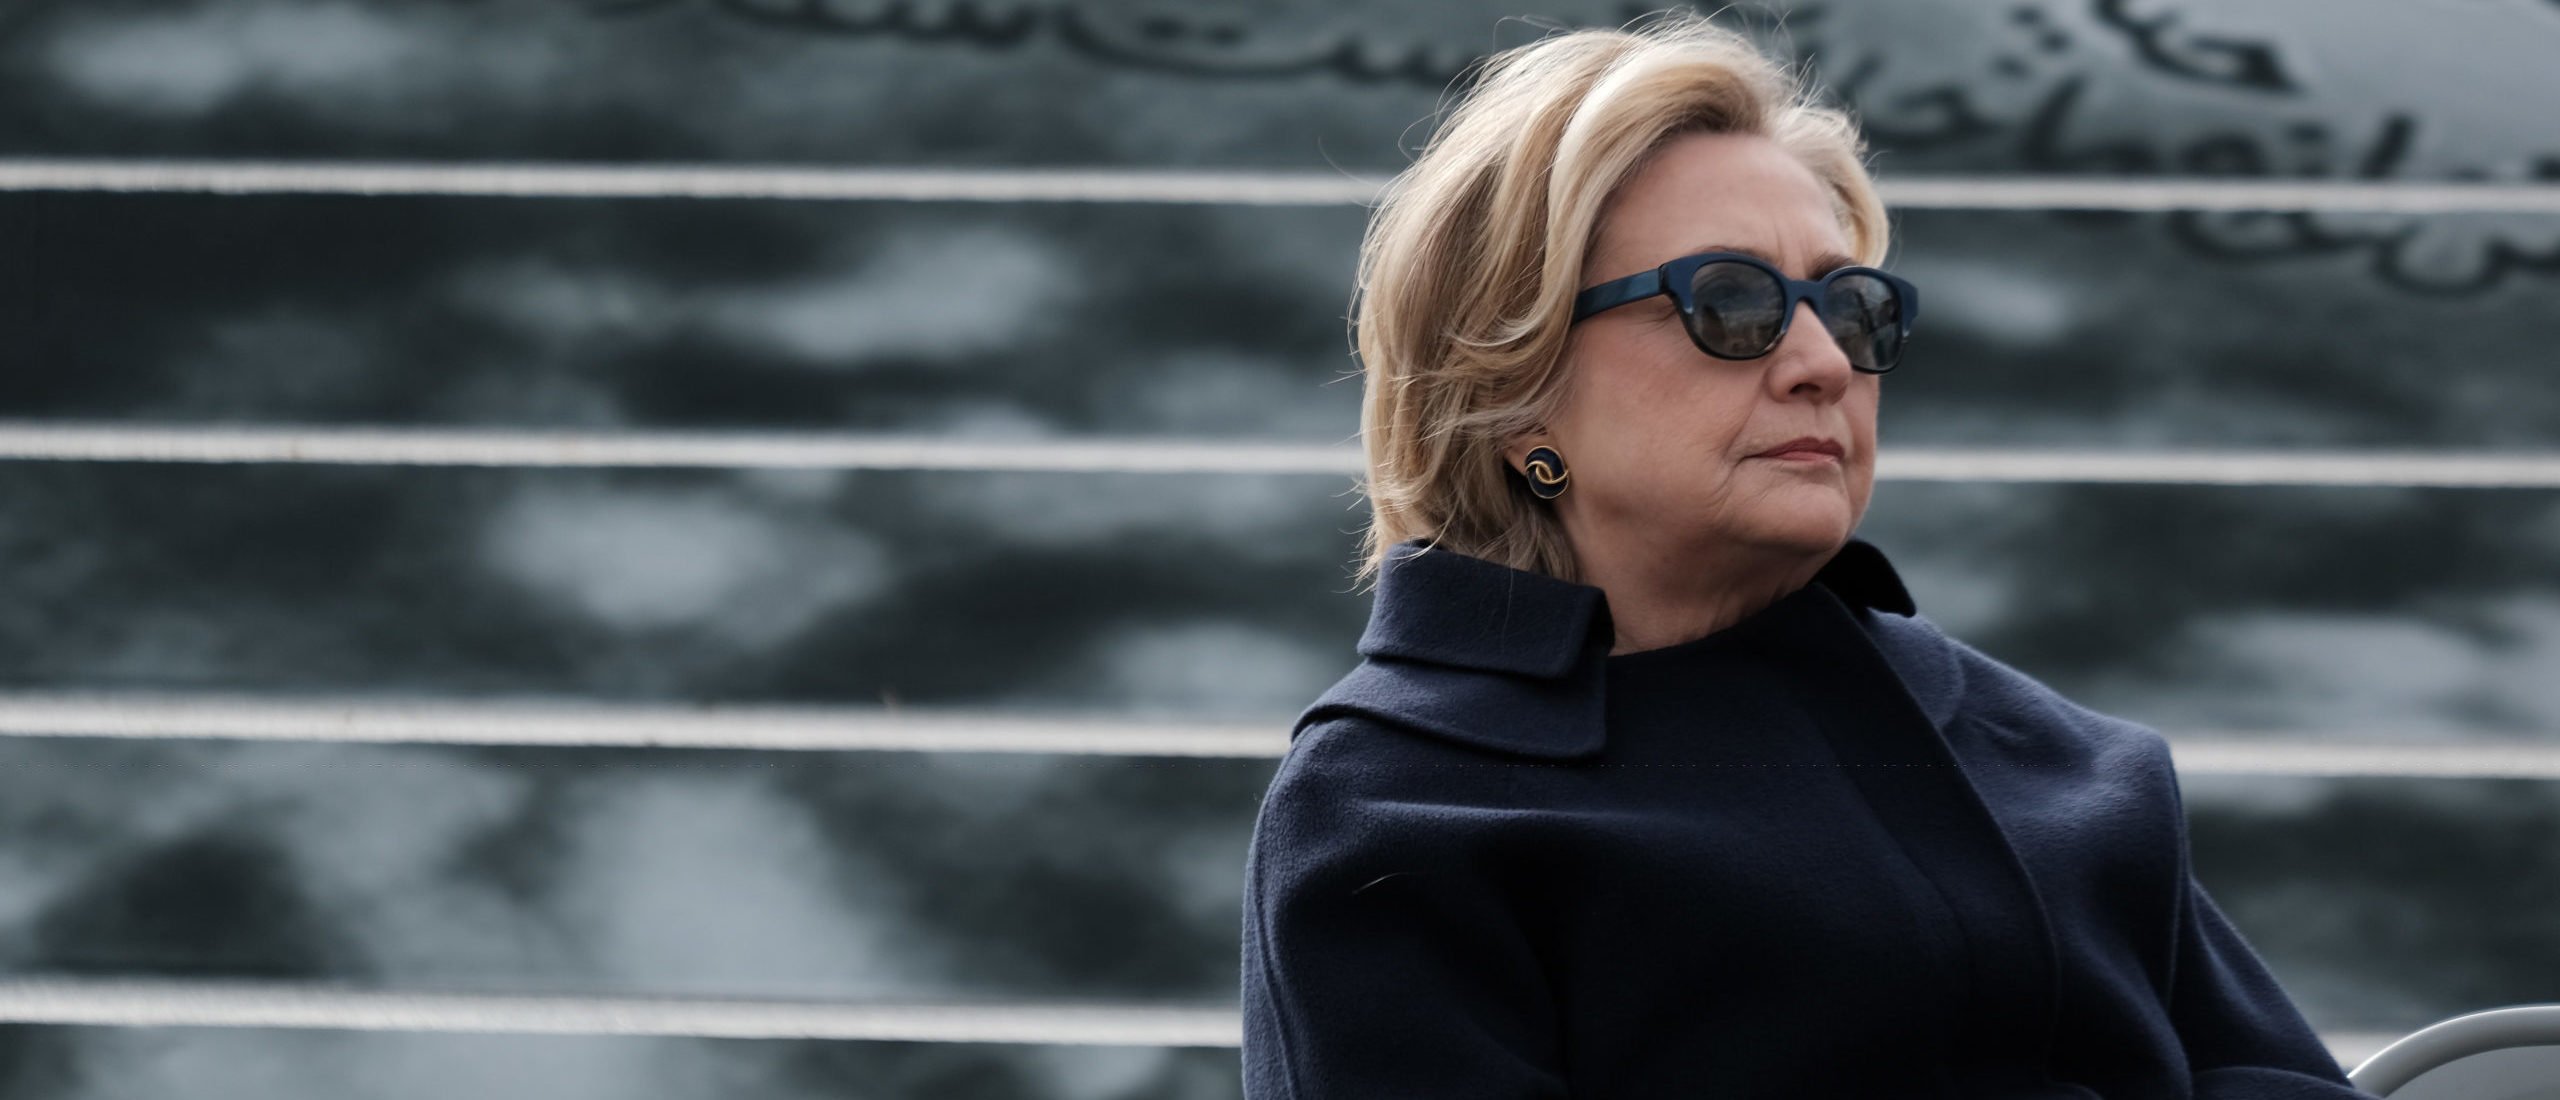 Former U.S. Secretary of State Hillary Clinton joins artists and activists at the opening of the Eyes on Iran art exhibition at Roosevelt Island's FDR Four Freedoms State Park on November 28, 2022 in New York City.